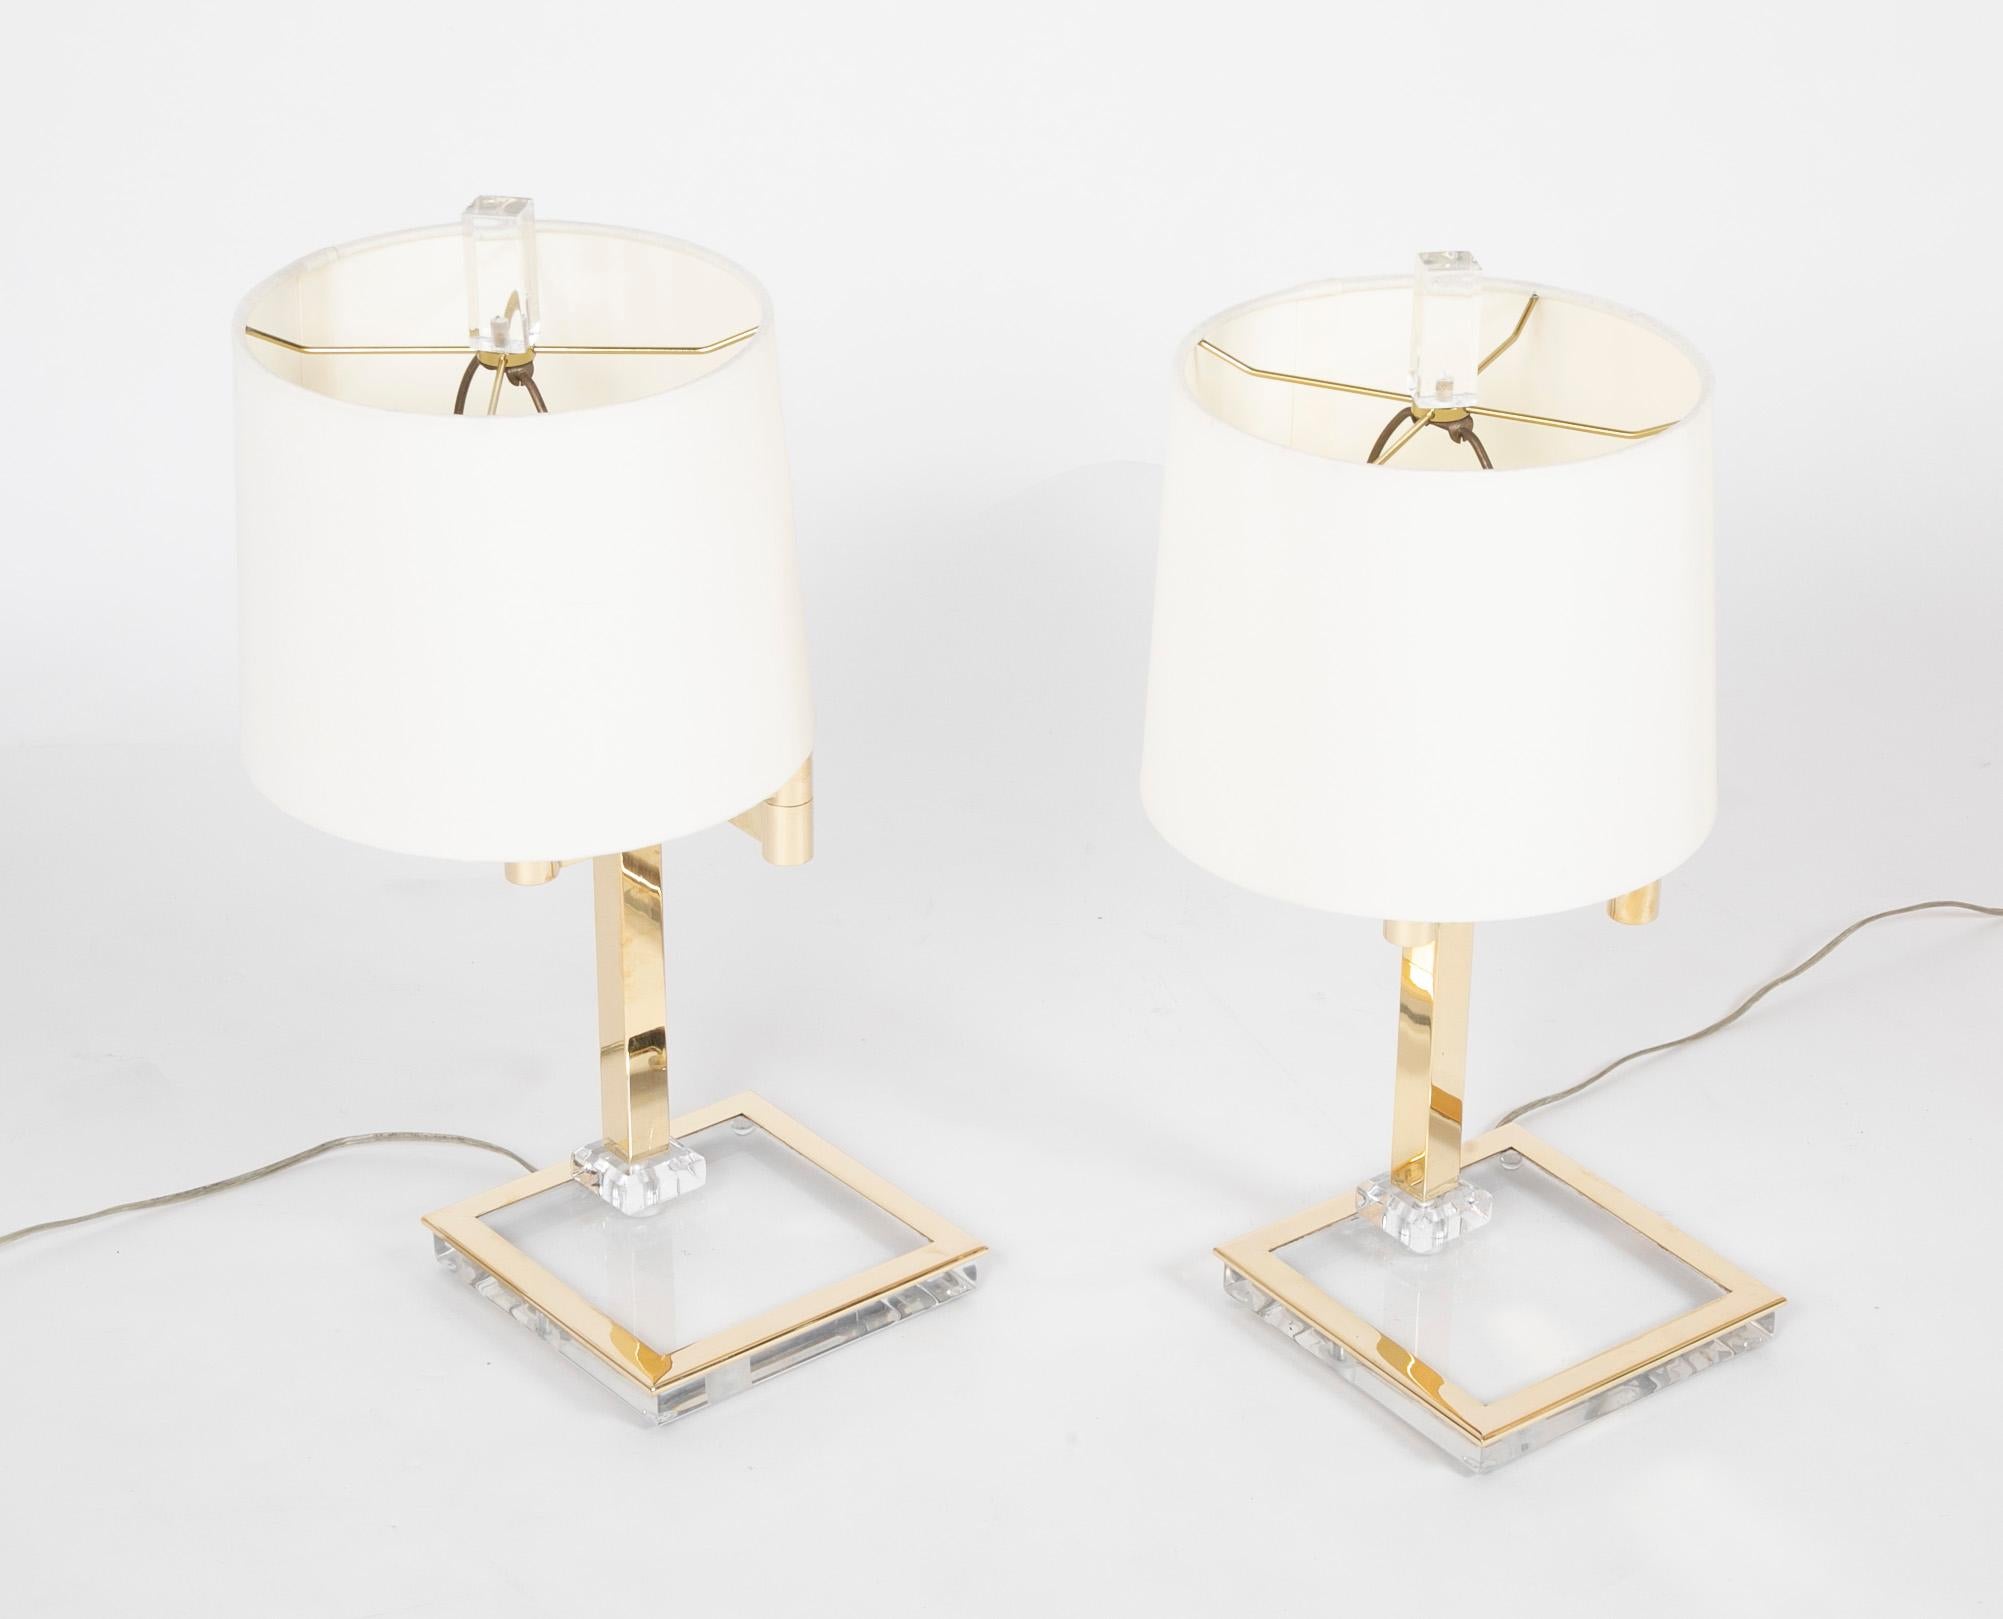 Both stylish and practical, this is a great looking pair of Italian Mid-Century Modern brass and lucite table lamps. The adjustable swing arms make these perfect for a desk or pair of end tables or bedside tables. With original lucite finials. 
I